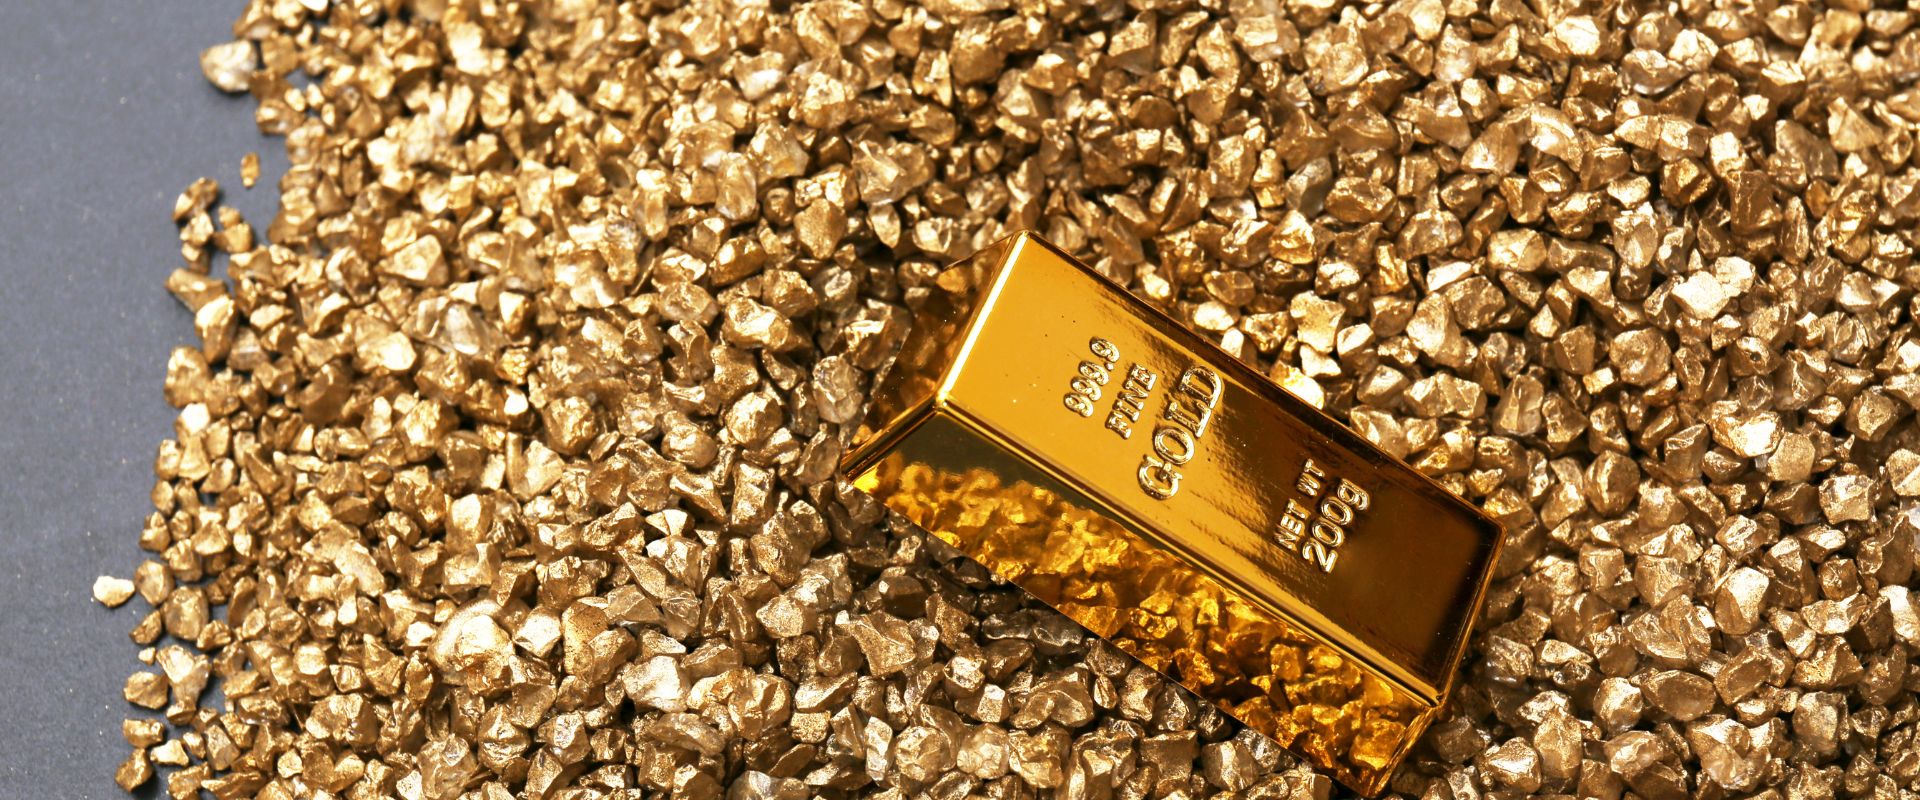 two hundred grams gold bar on gold nuggets